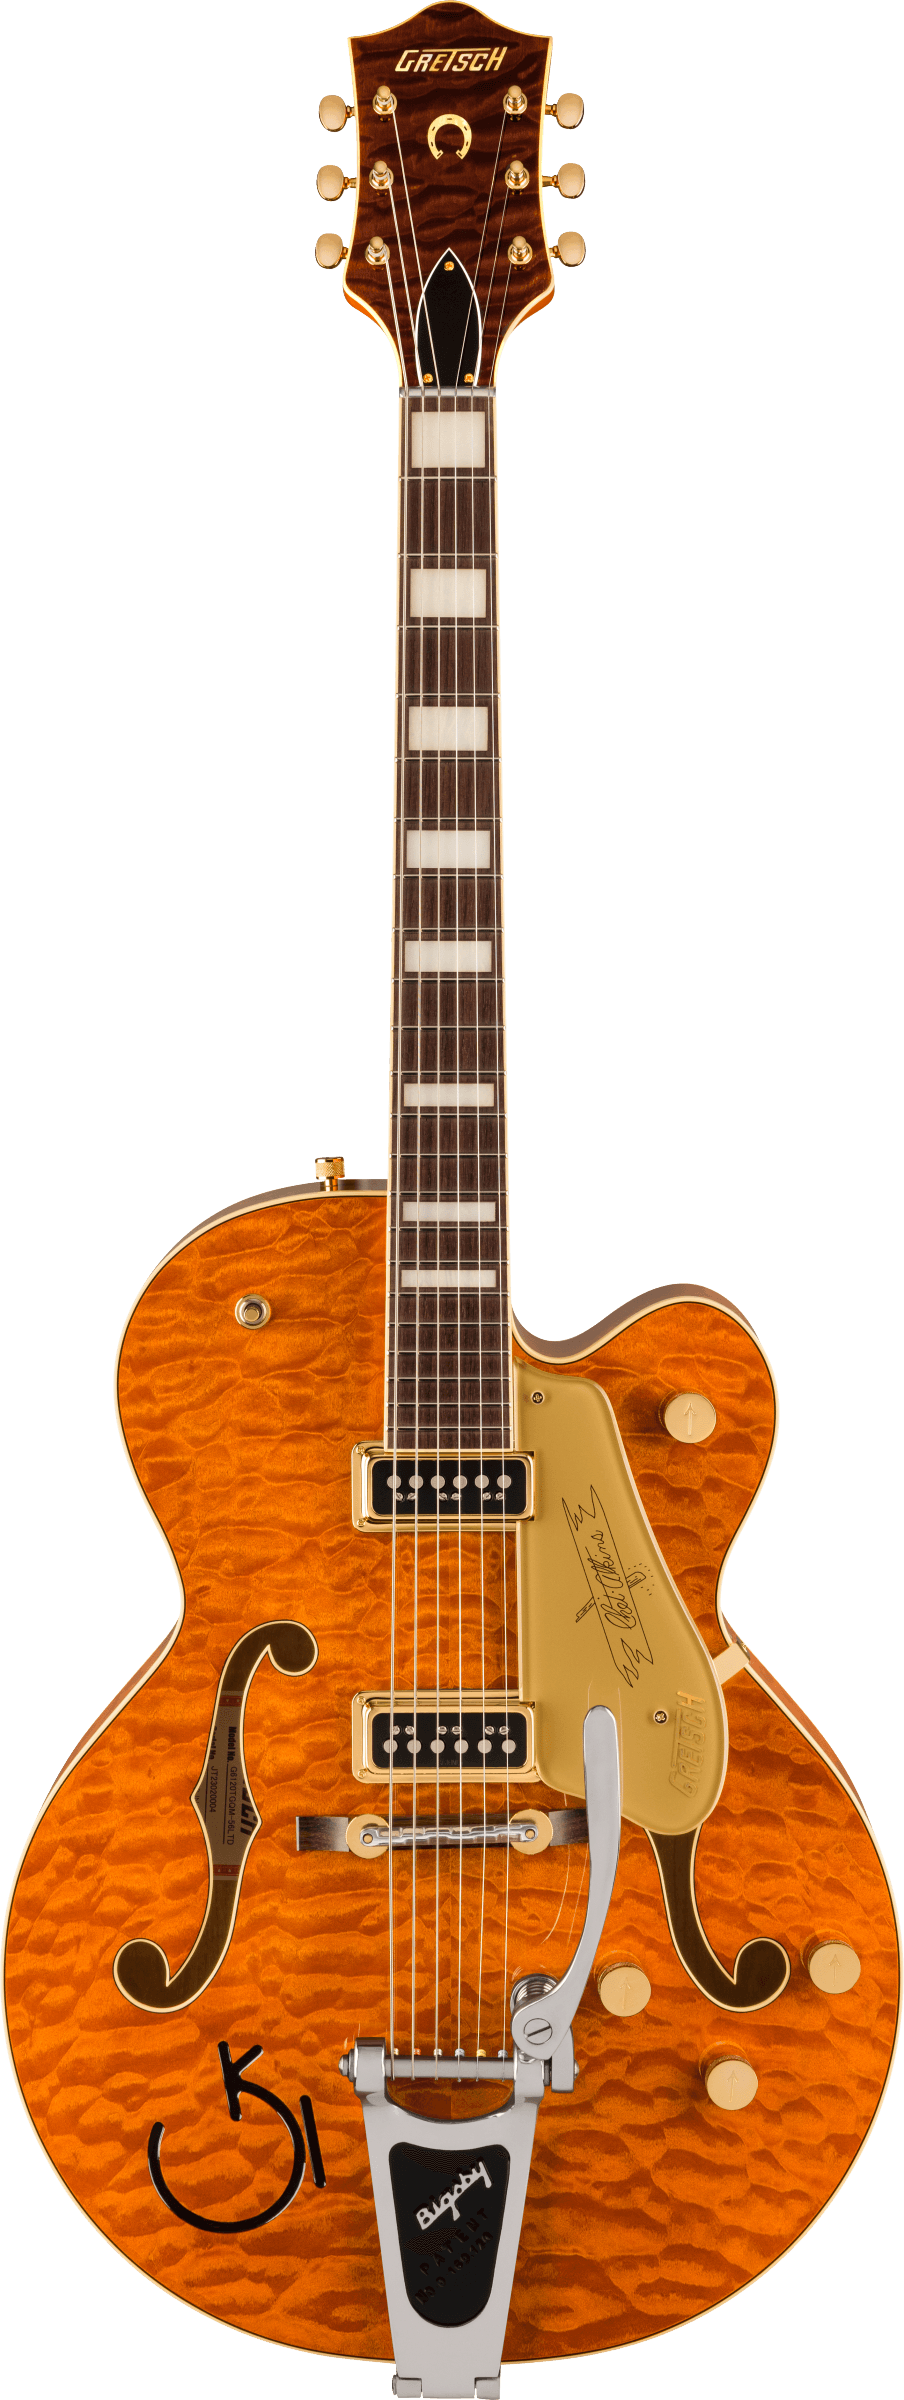 Full frontal of Gretsch G6120TGQM56 Limited Edition Quilt Classic Chet Atkins HollowBody wBigsby Roundup Orange Stain Lacquer.